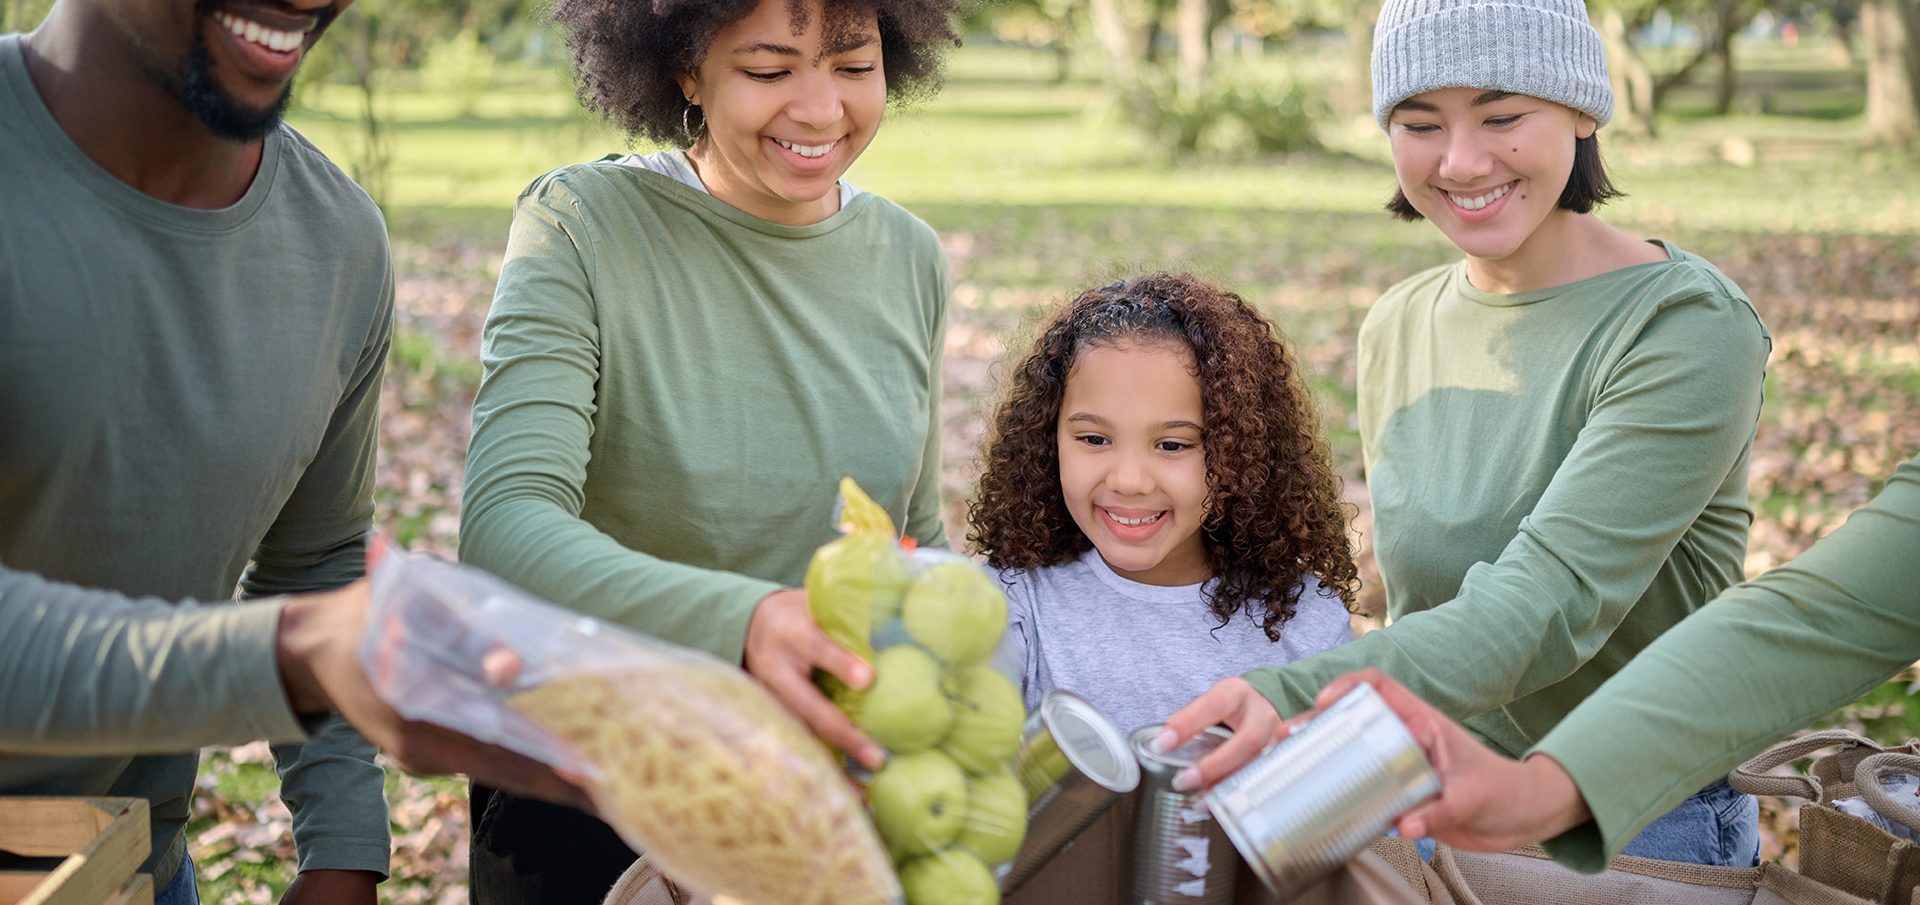 A happy family appears to be enjoying an outdoor activity together, with a focus on sharing and handling fresh produce and grocery items.